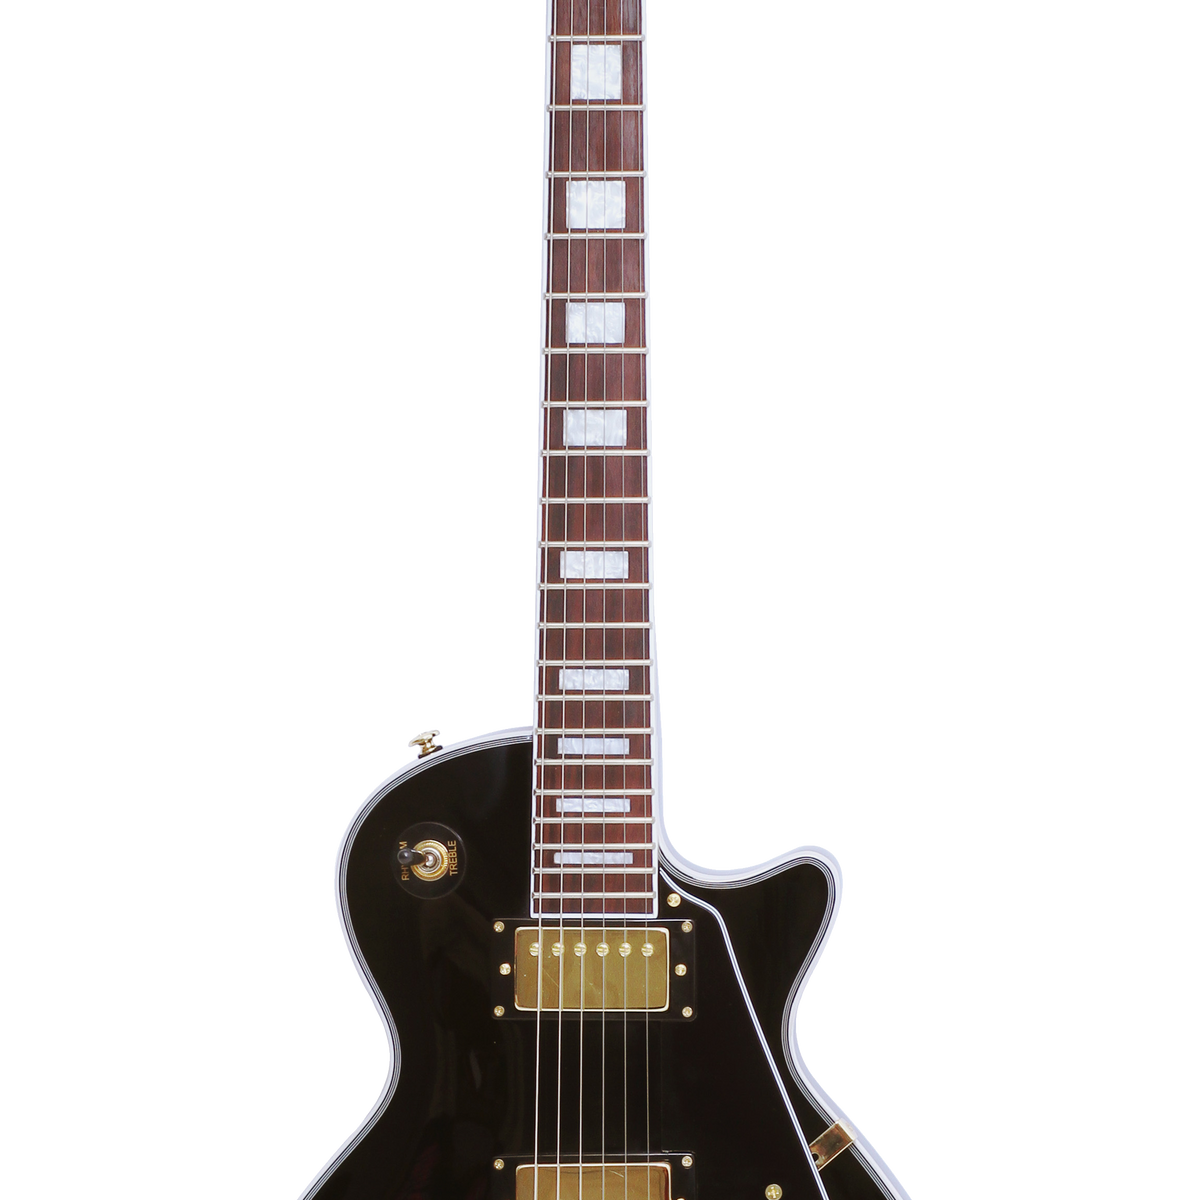 Deluxe LP Style Electric Guitar - Black